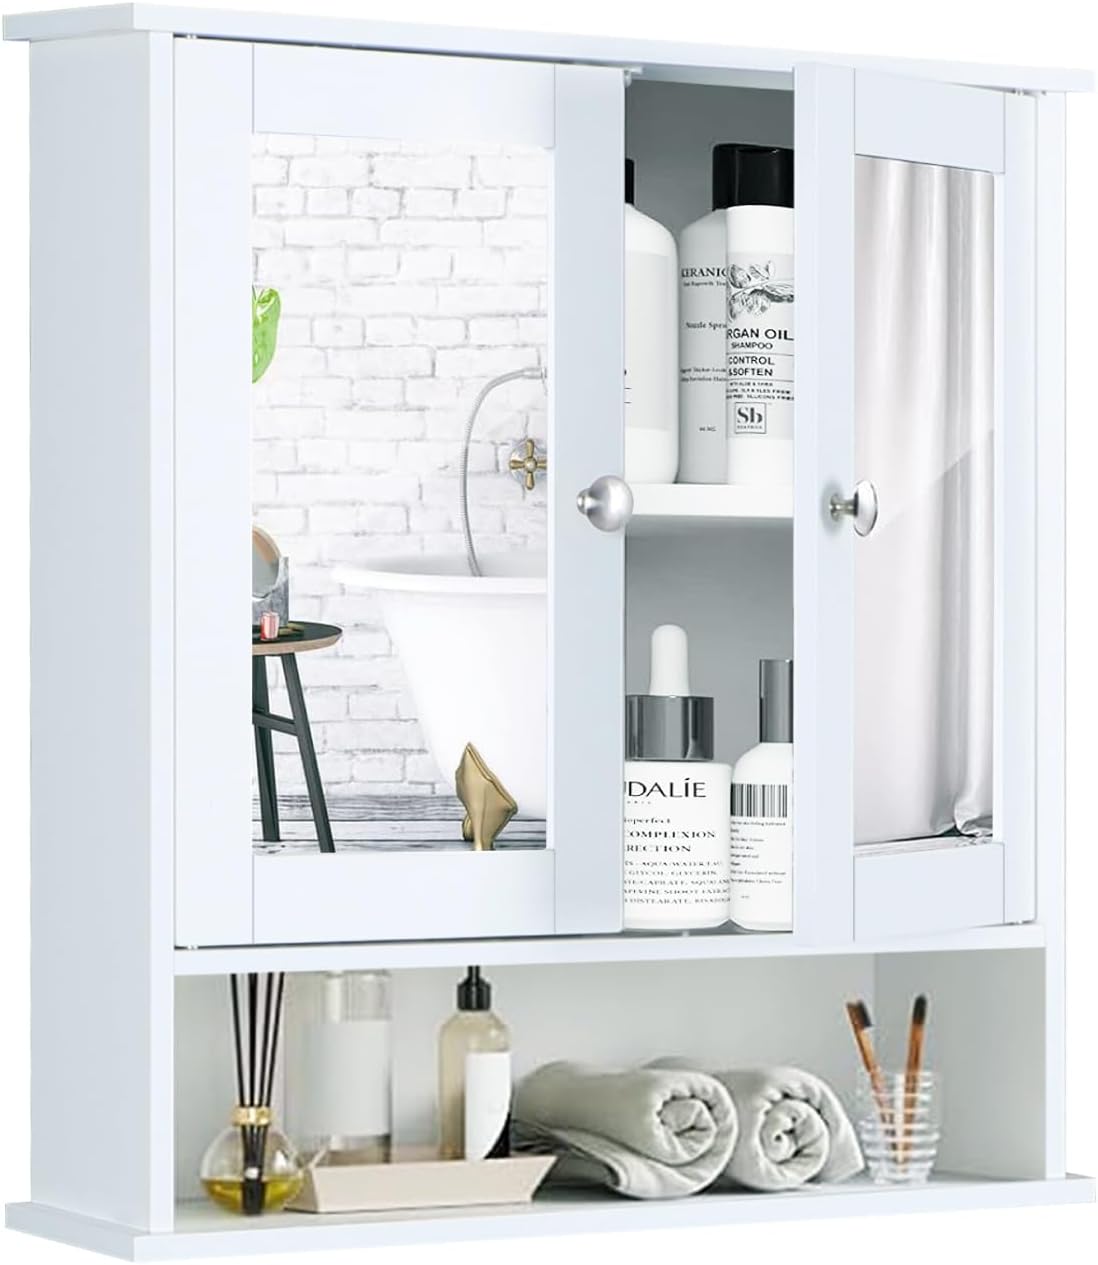 MFSTUDIO Modern Bathroom Wall Mounted Cabinets with Mirror, Hanging Medicine Storage Cabinet for Bathroom Living Room Kitchen, White